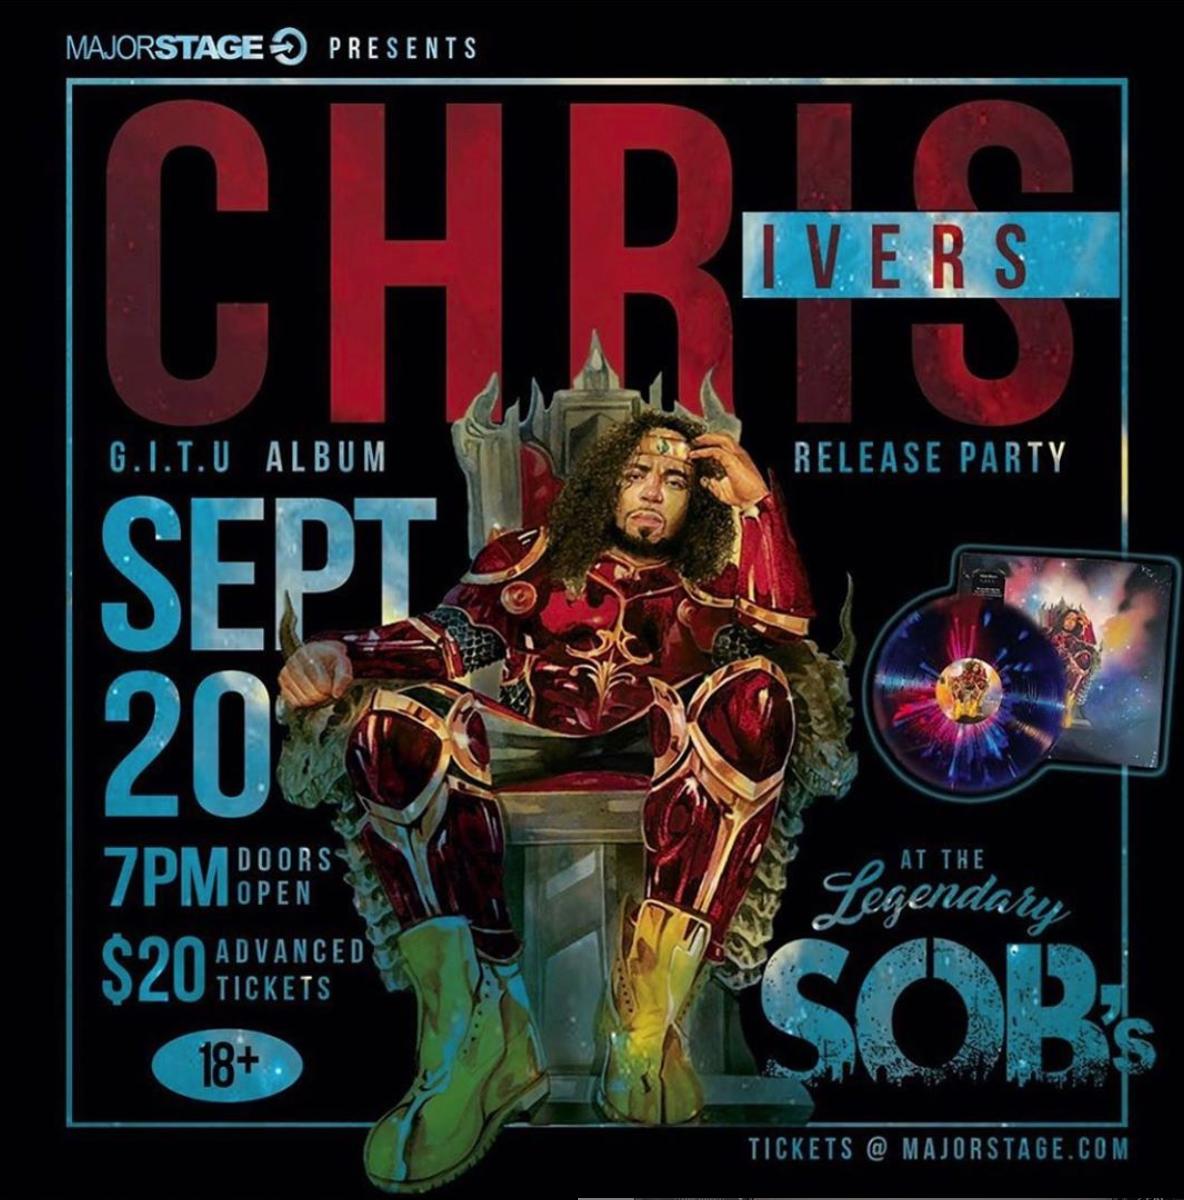 Tomorrow at @SOBs hit the @OnlyChrisRivers G.I.T.U. release party